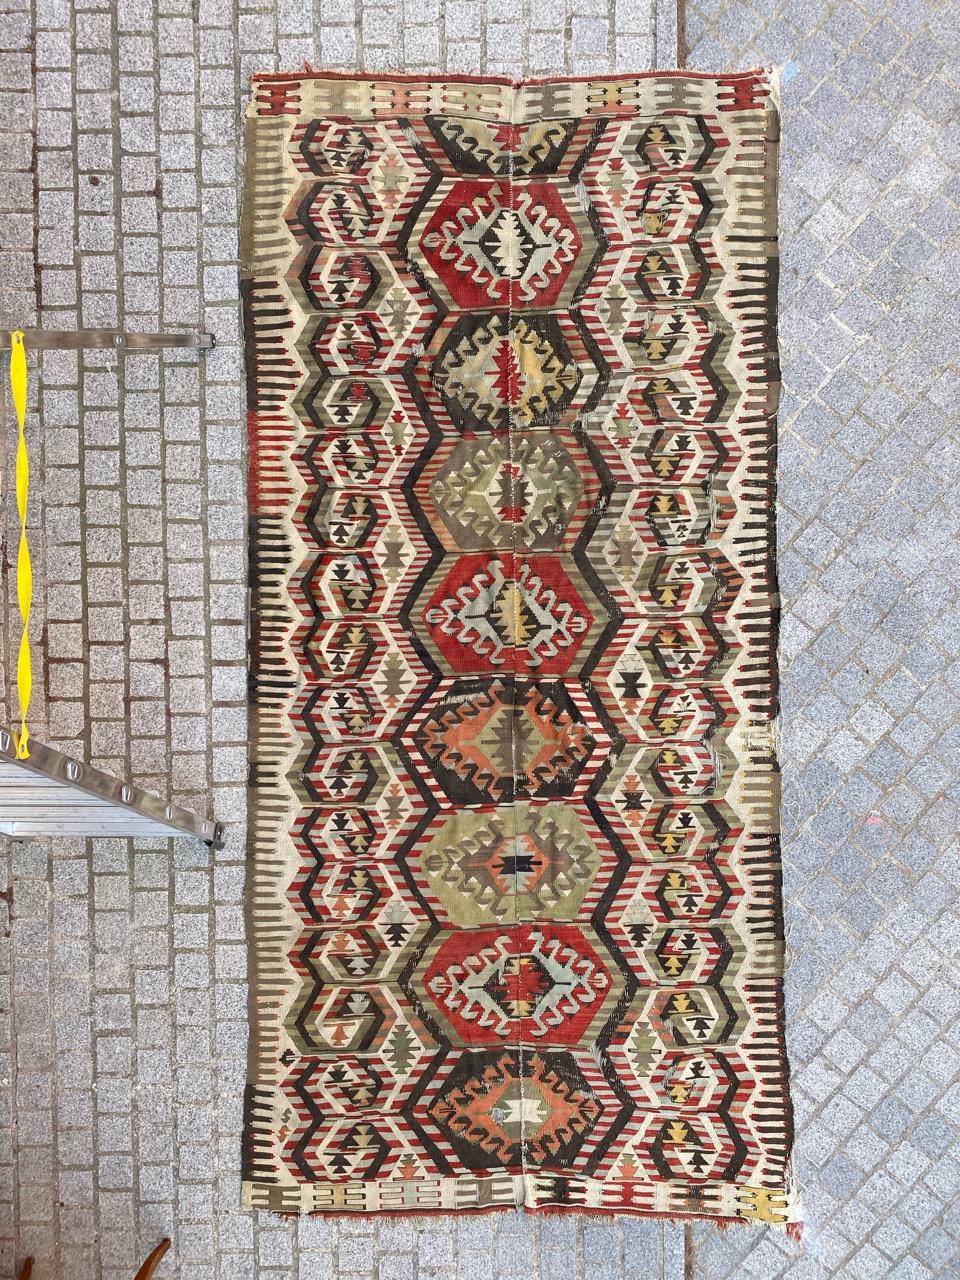 Very beautiful early 20th century Turkish Anatolian Kilim with a beautiful geometrical design and nice colors with dark brown, red, blue, yellow, green, orange and grey, entirely handwoven with wool on wool. Size: 5ft 2.21 inch x 10ft 5.99 inch.